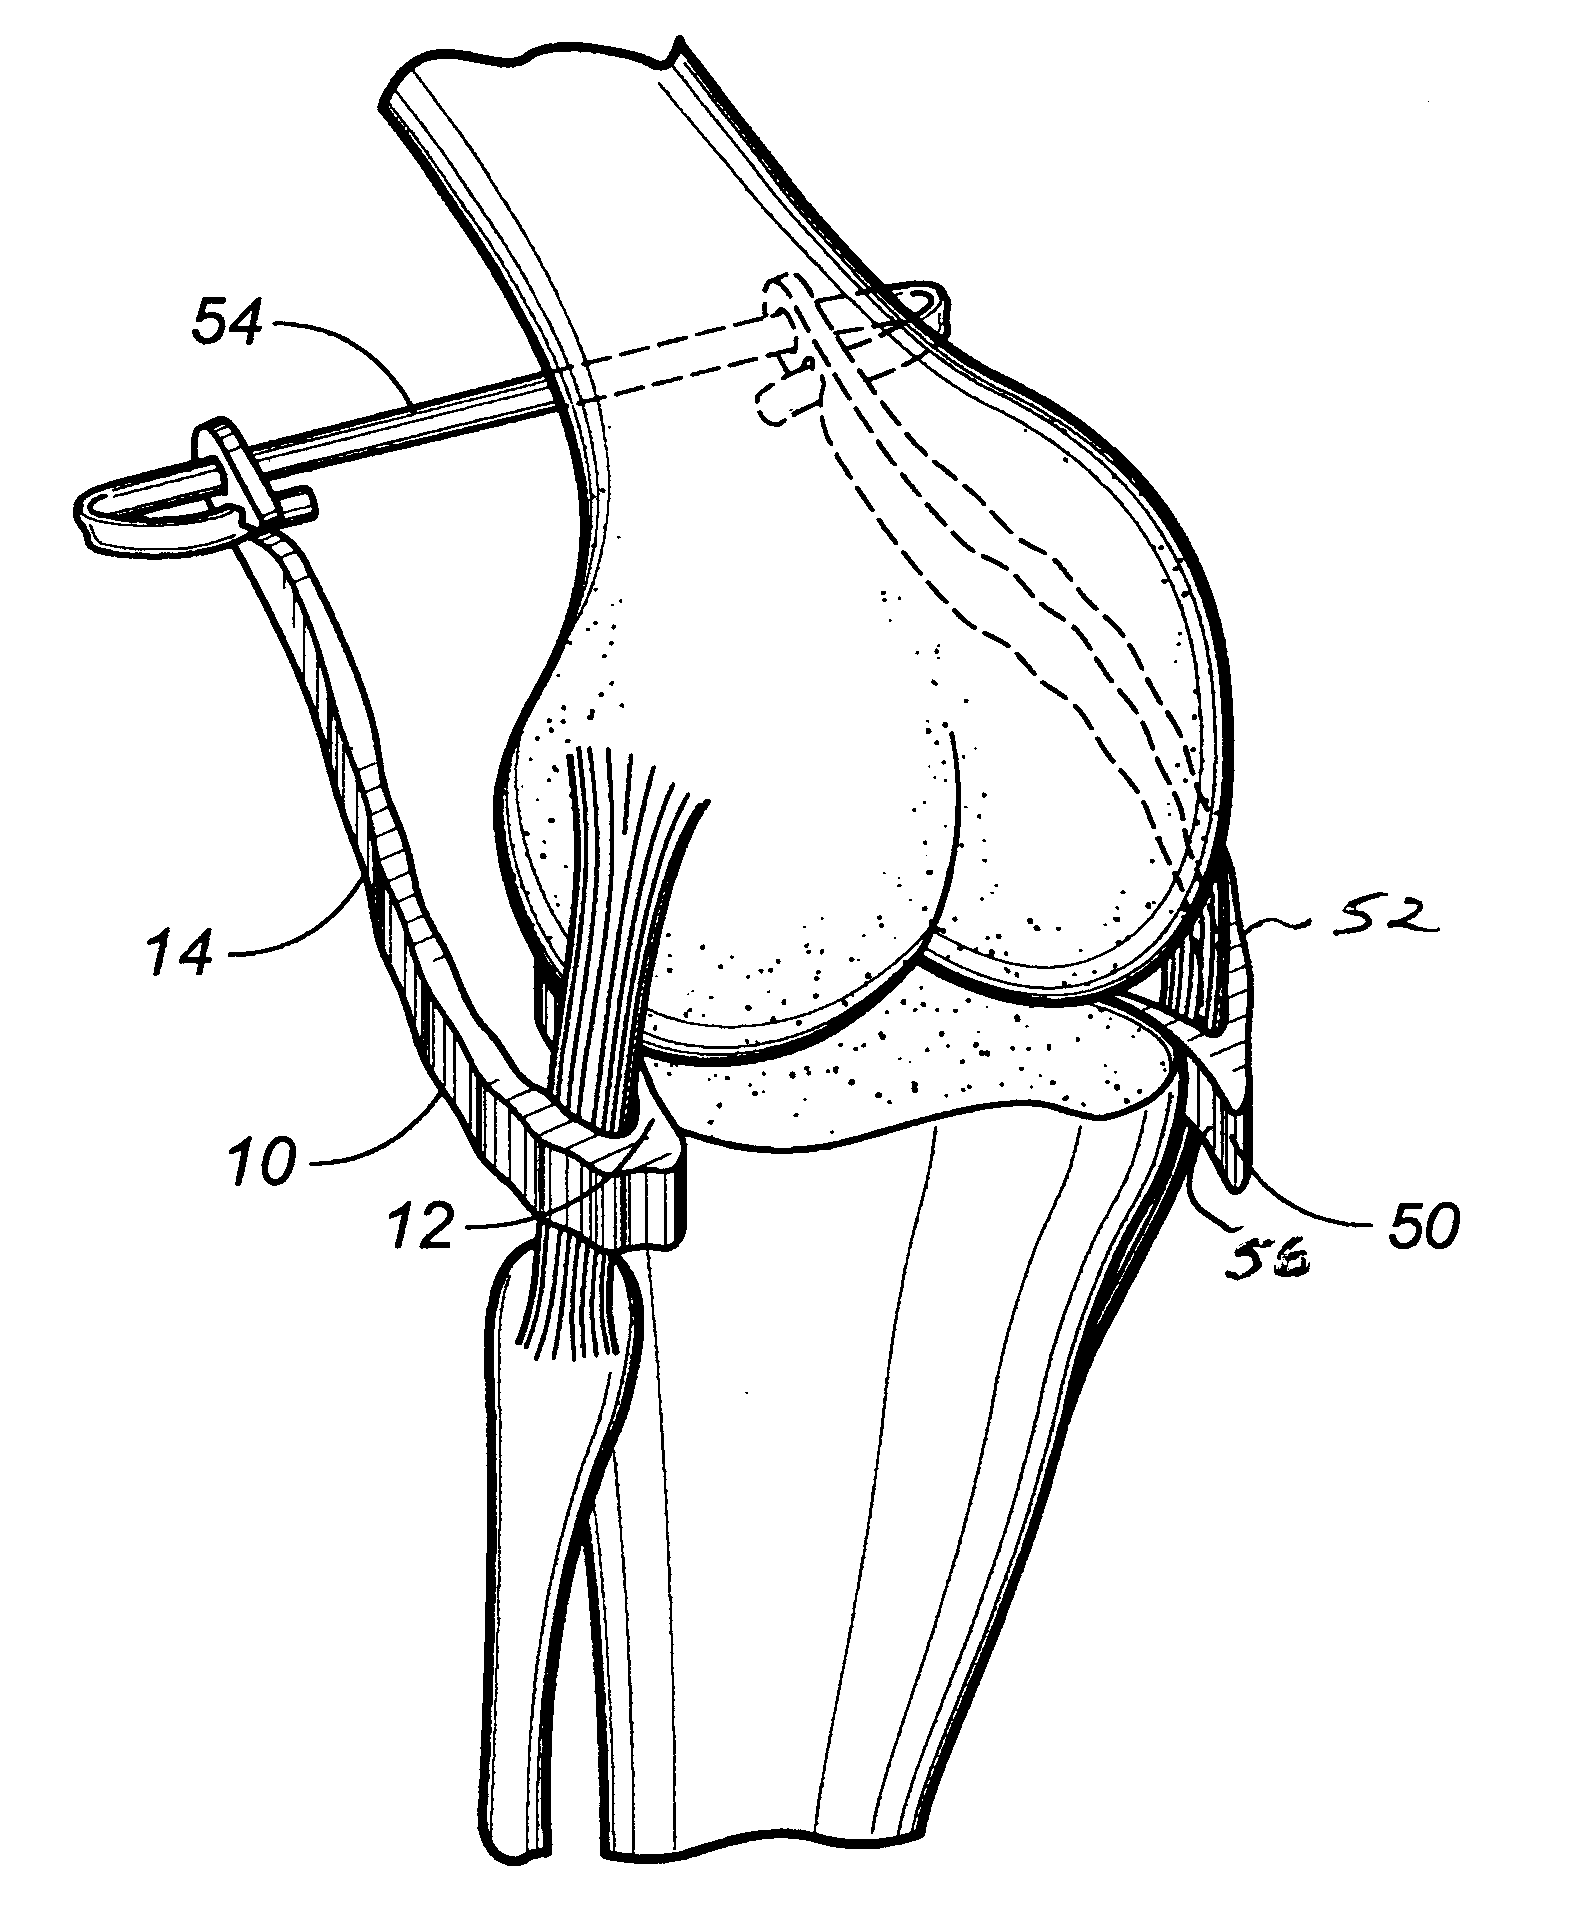 Ligament retractor assembly for use in performing knee surgery